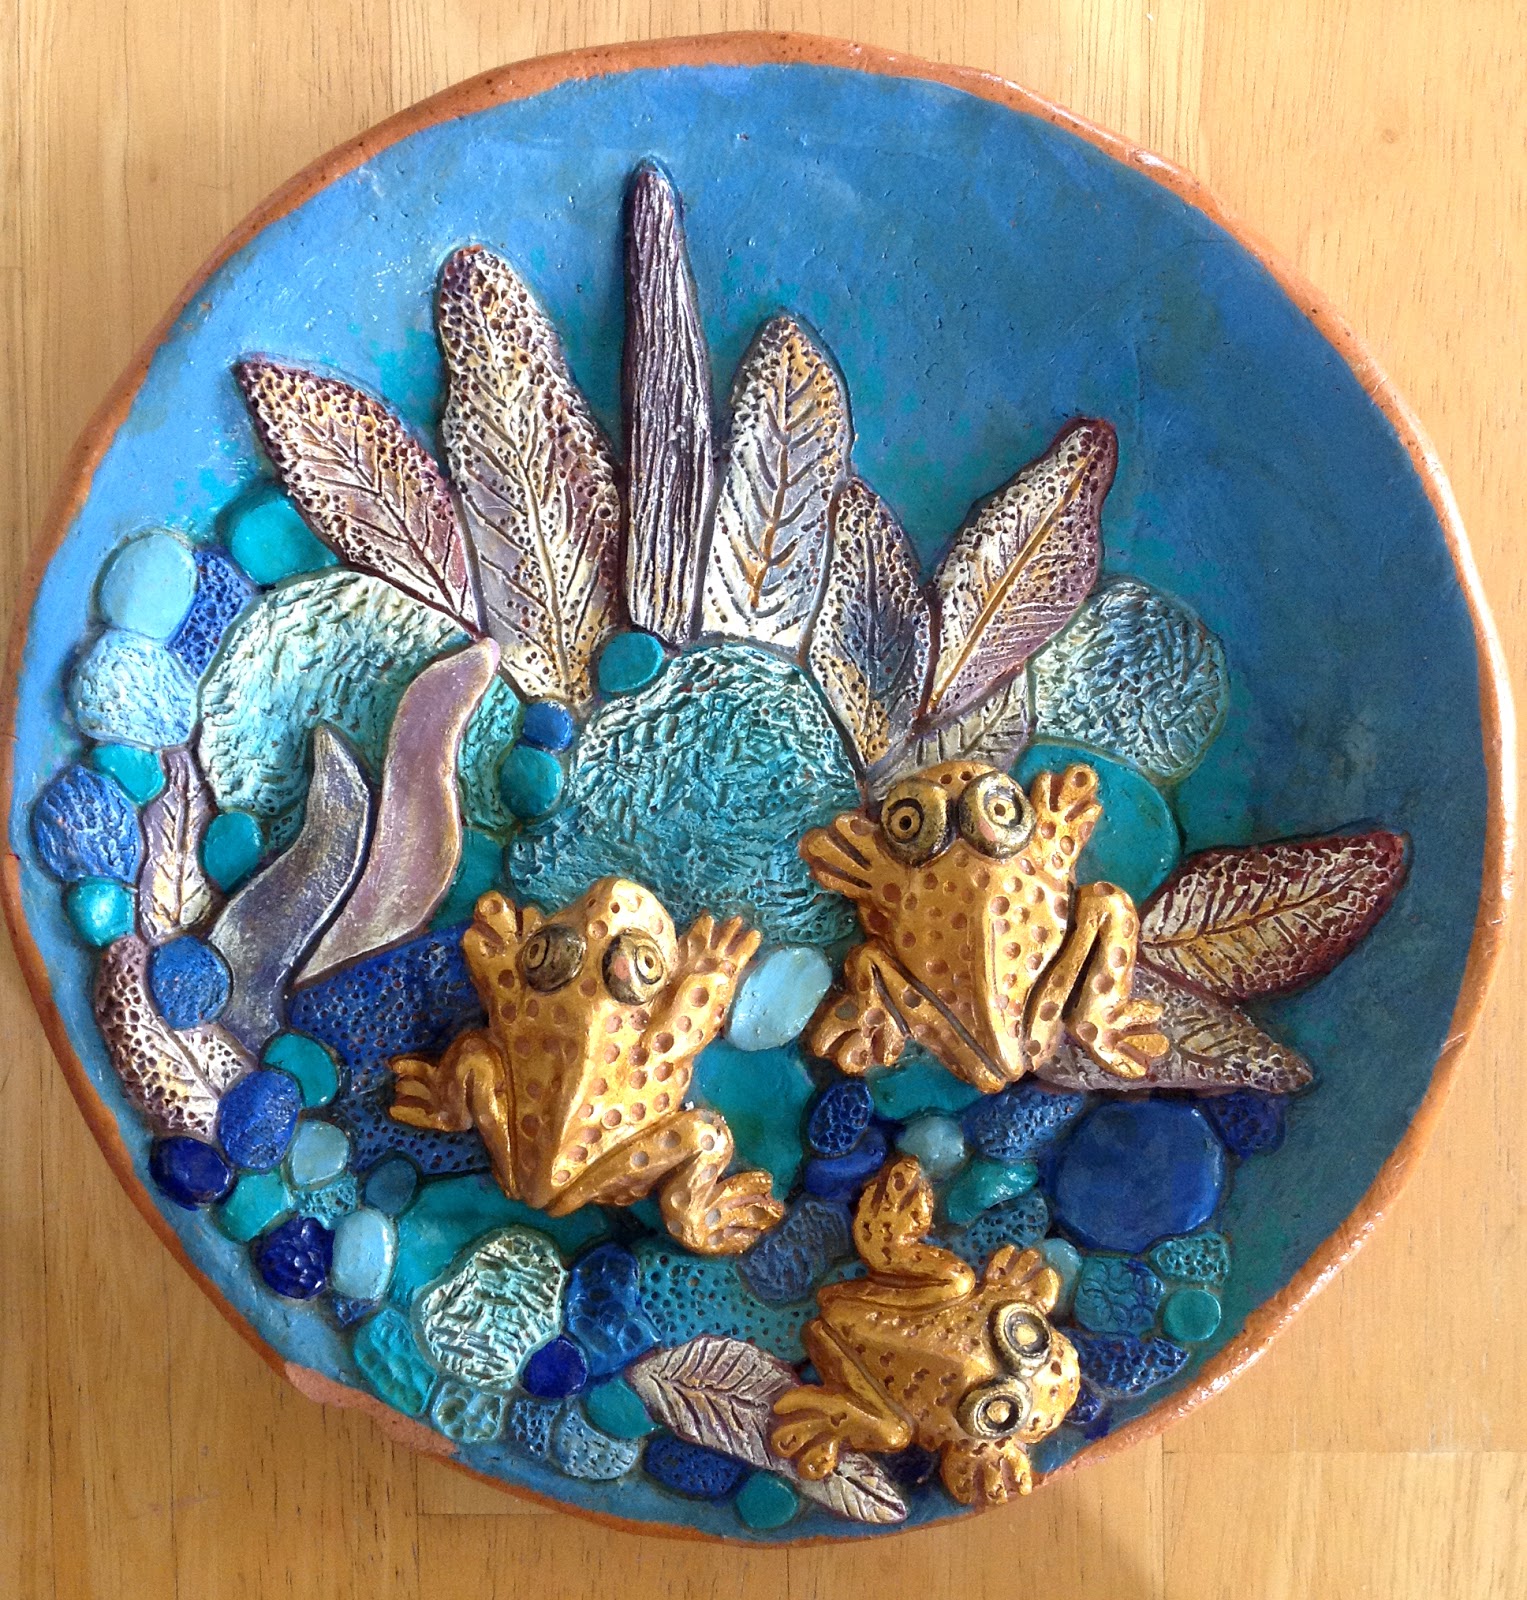 CLAY WORK INSTRUCTIONS - How to Make a Relief Sculpture Plate in Air Dry  Clay